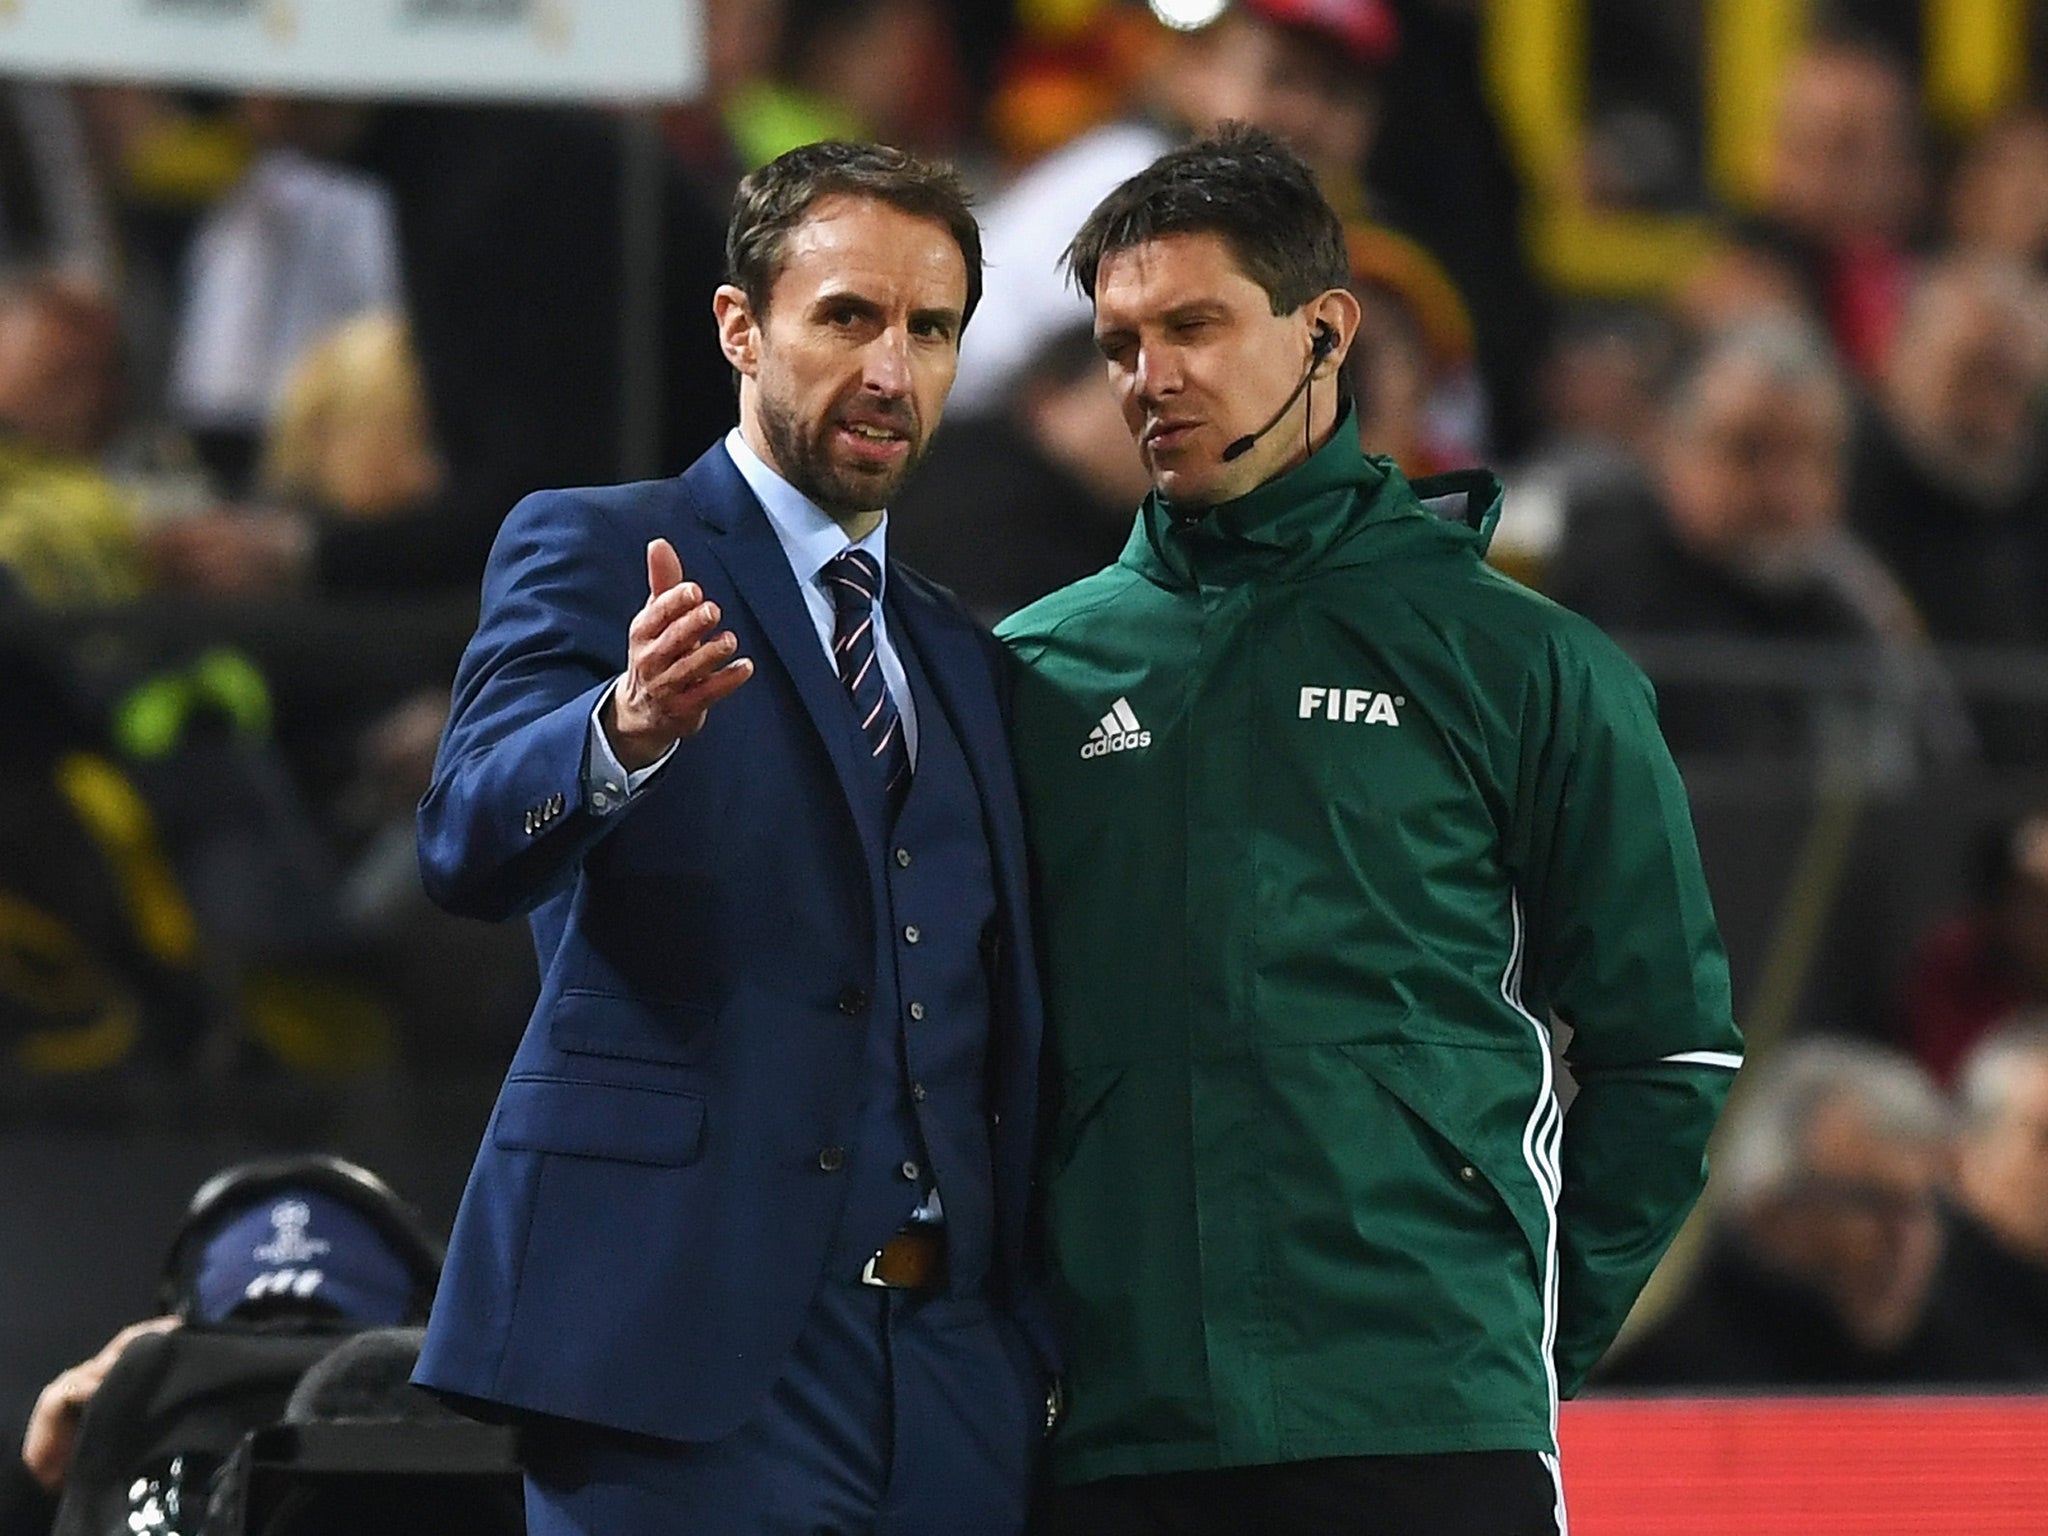 Gareth Southgate's side showed promise but ultimately went down to defeat